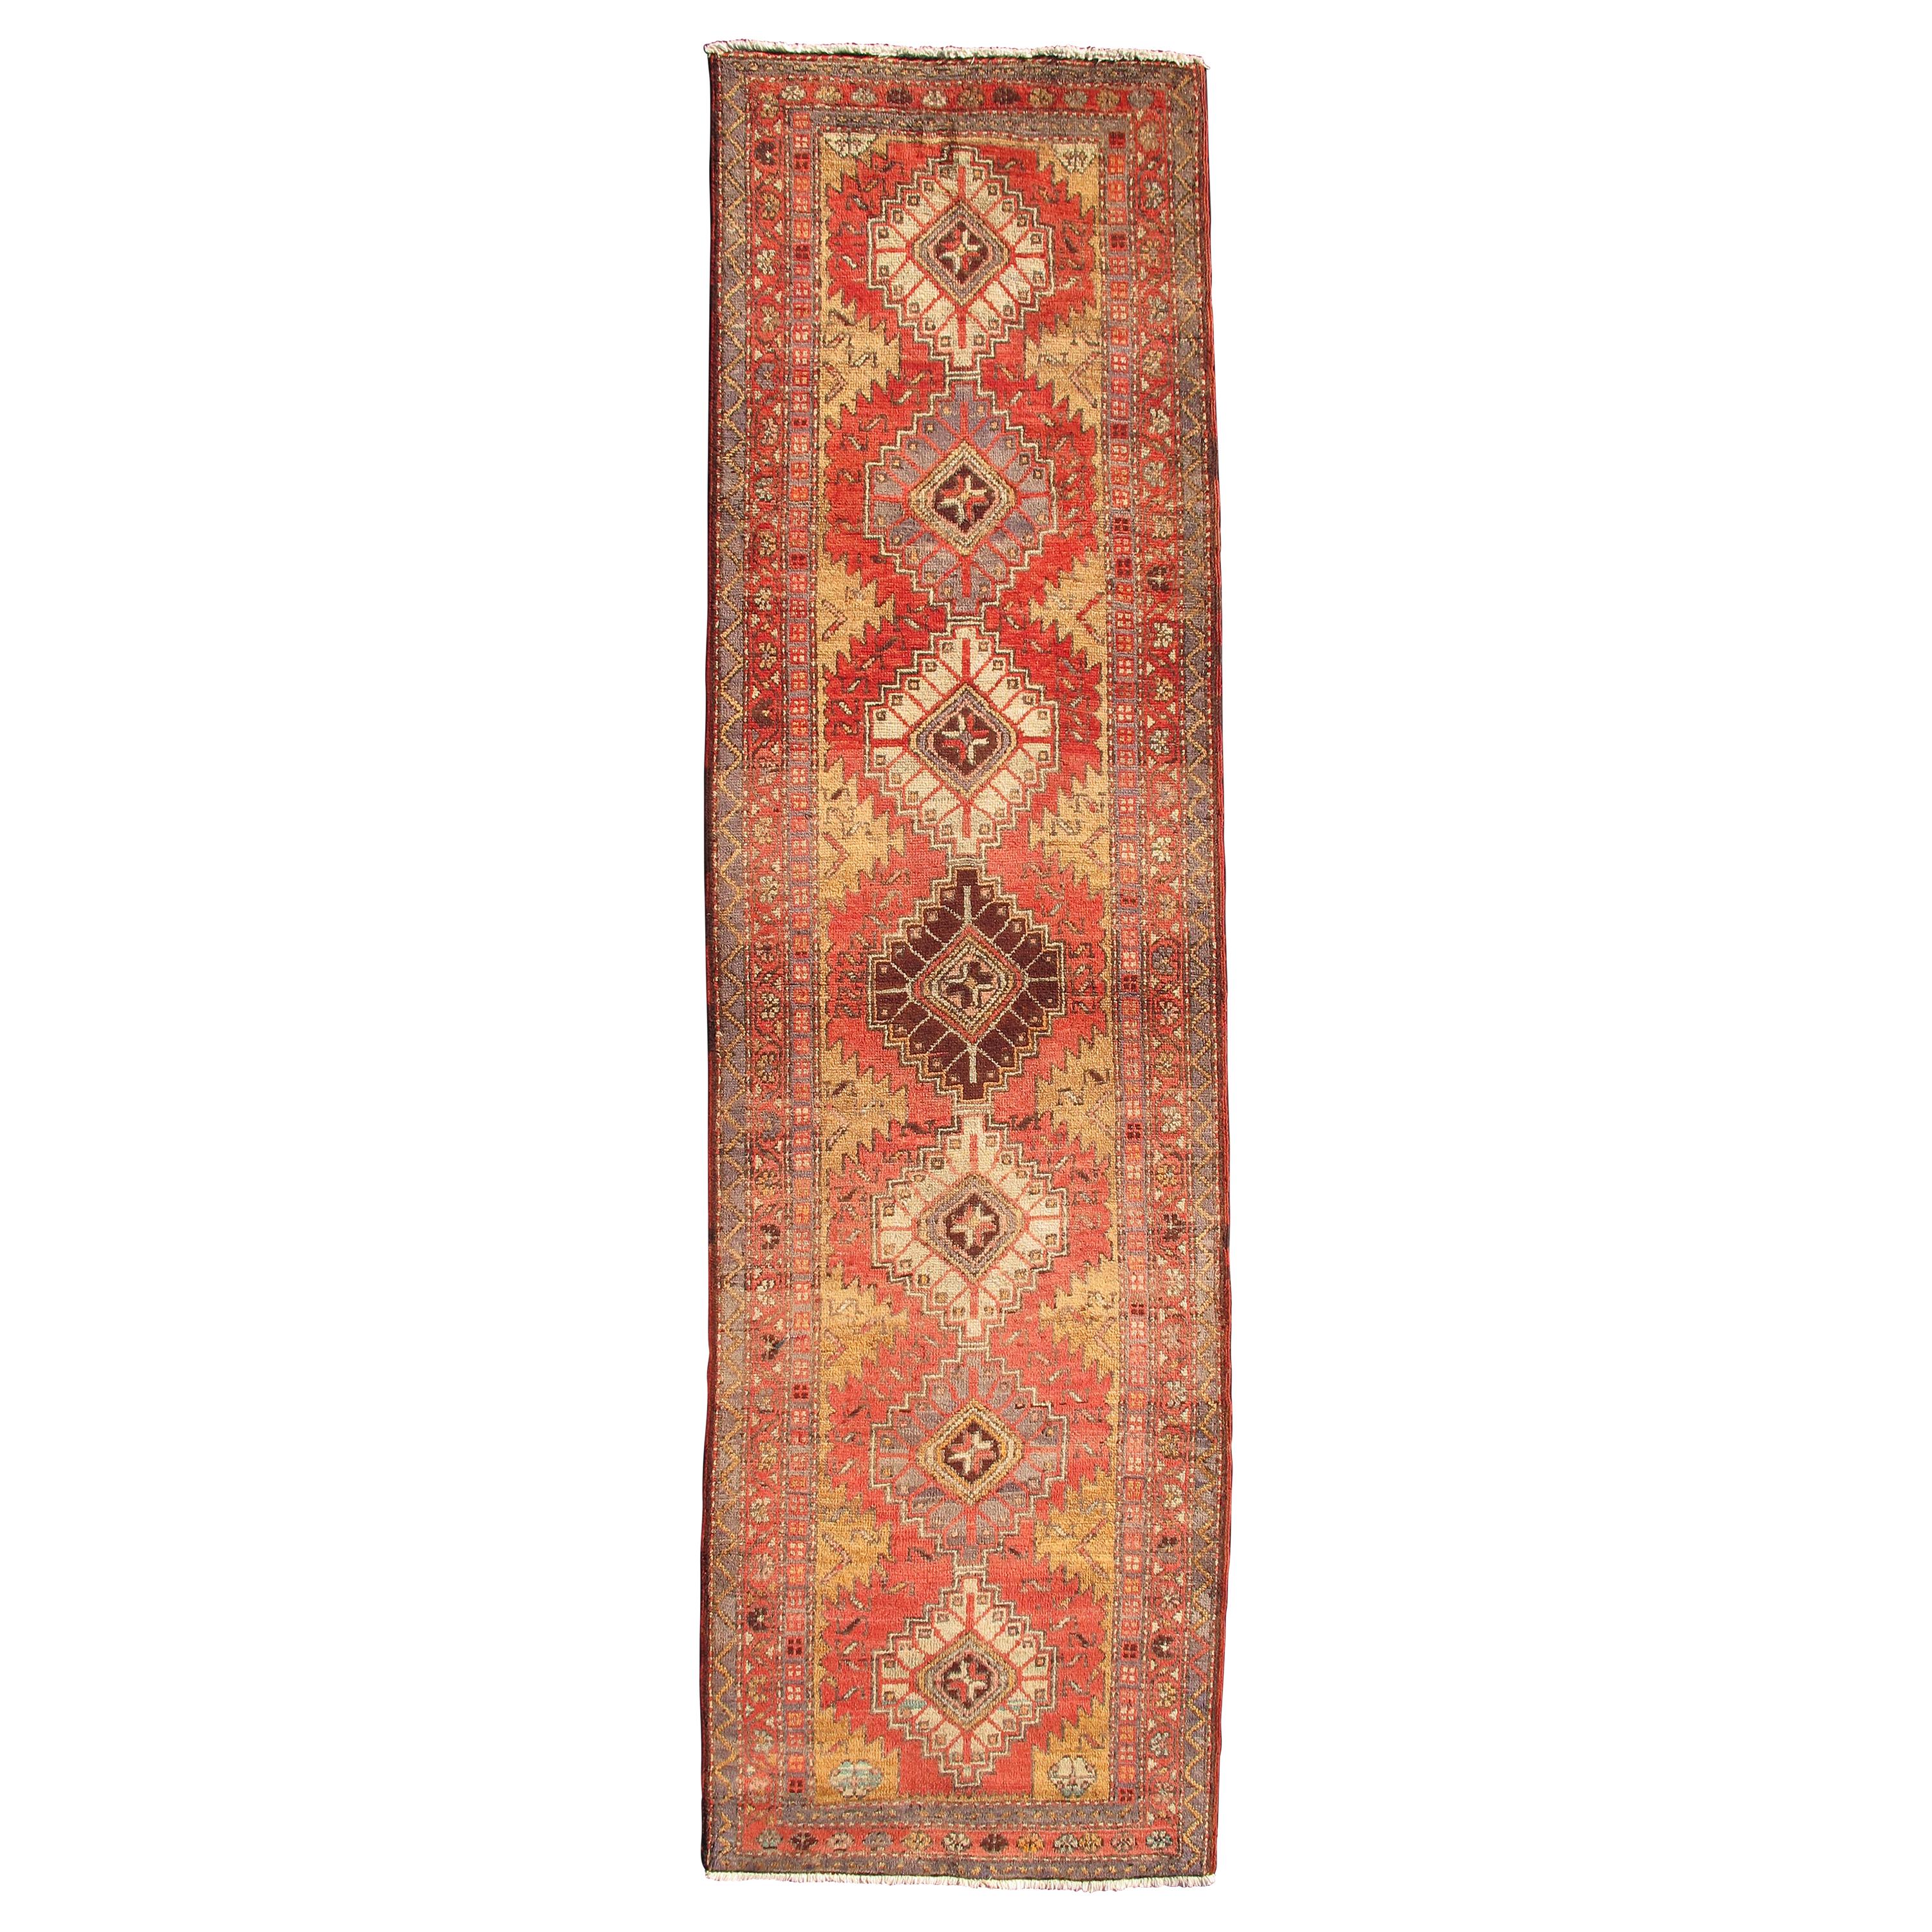 Semi Antique Persian Heriz Runner Rug in Soft Rusty Red, Gray and Golds